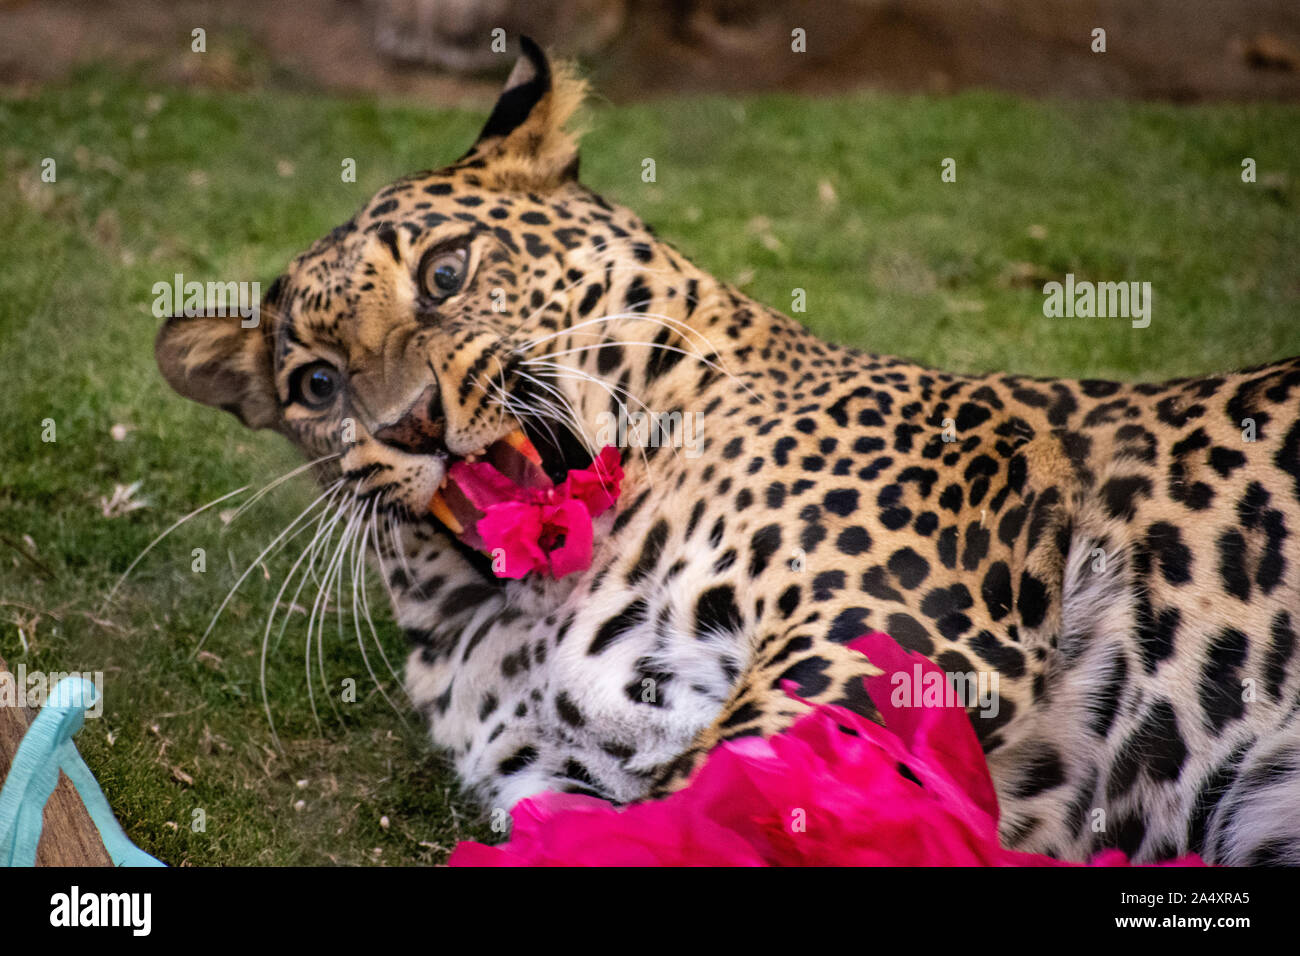 Close-up of a leopard making a funny face Stock Photo